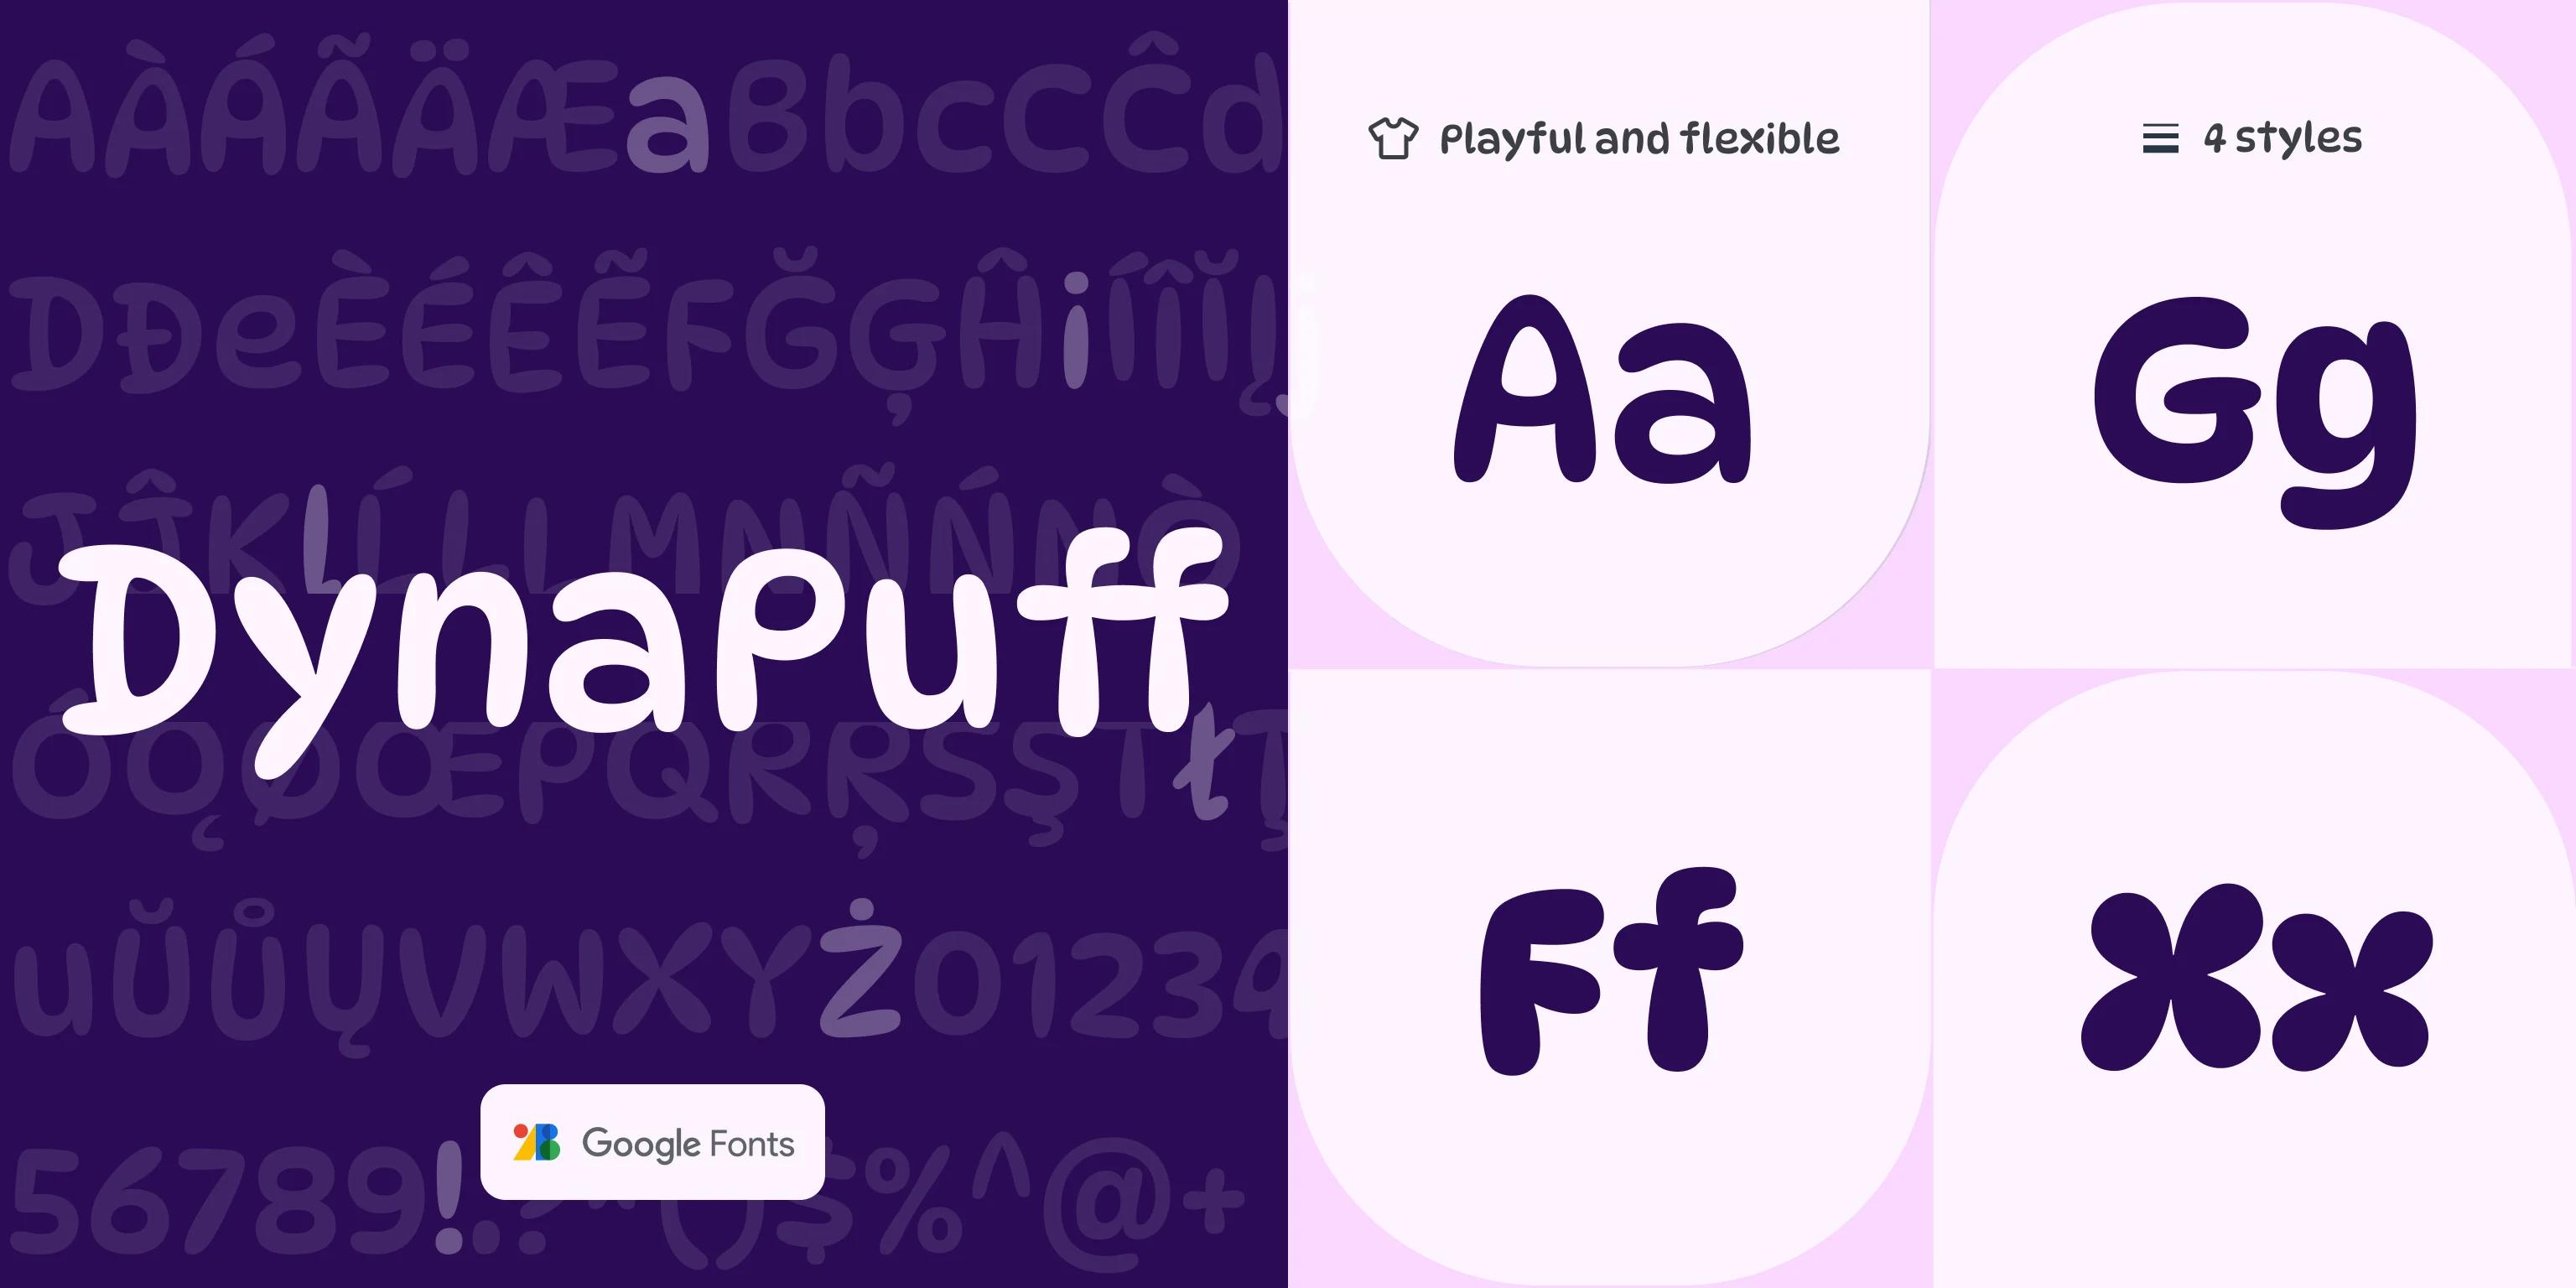 Overview image of individual letters showing a font with soft and puffy curves where letterforms usually are angular